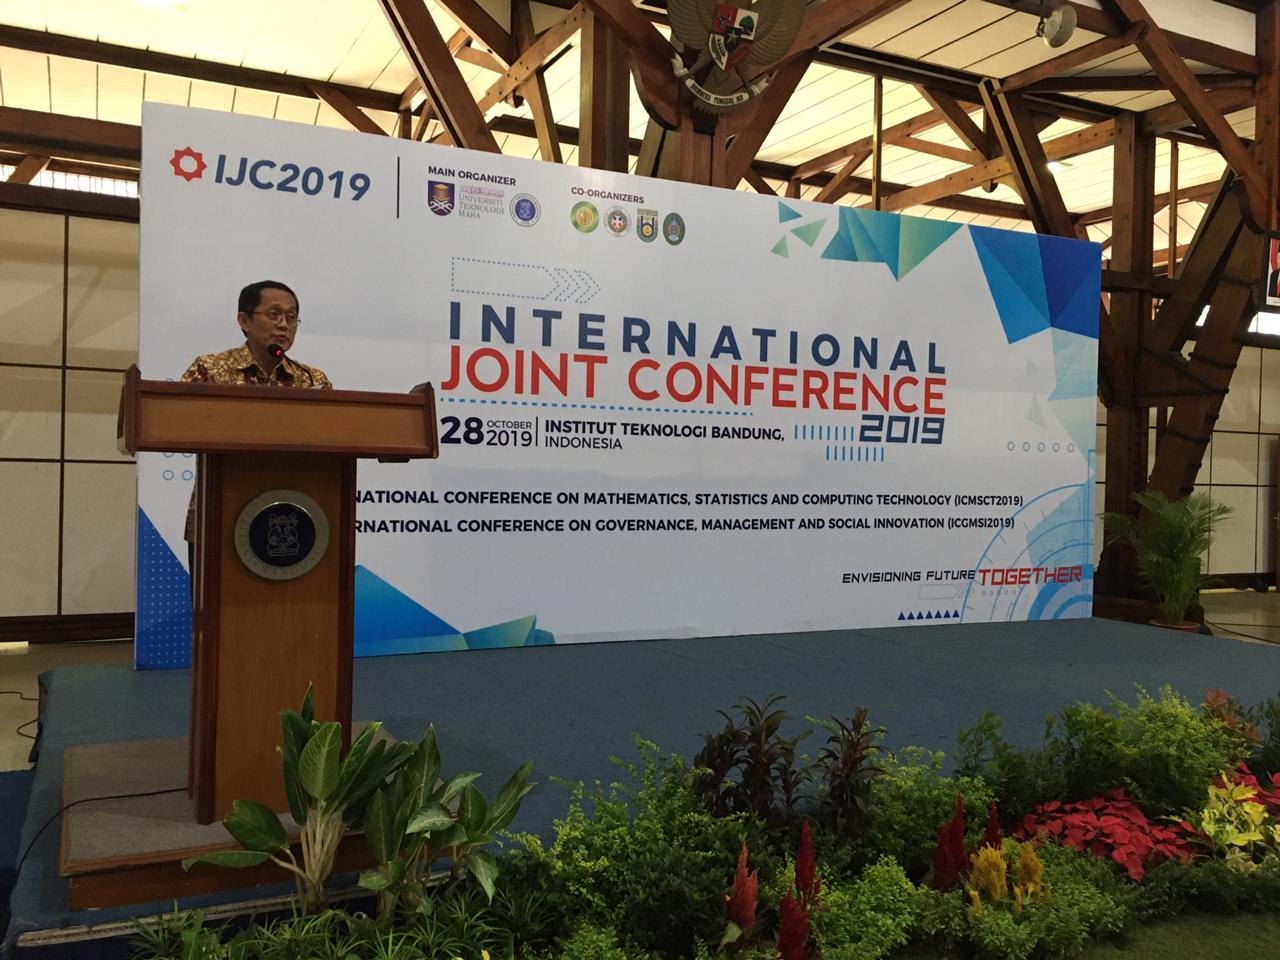 itb-hosted-international-joint-conference-2019